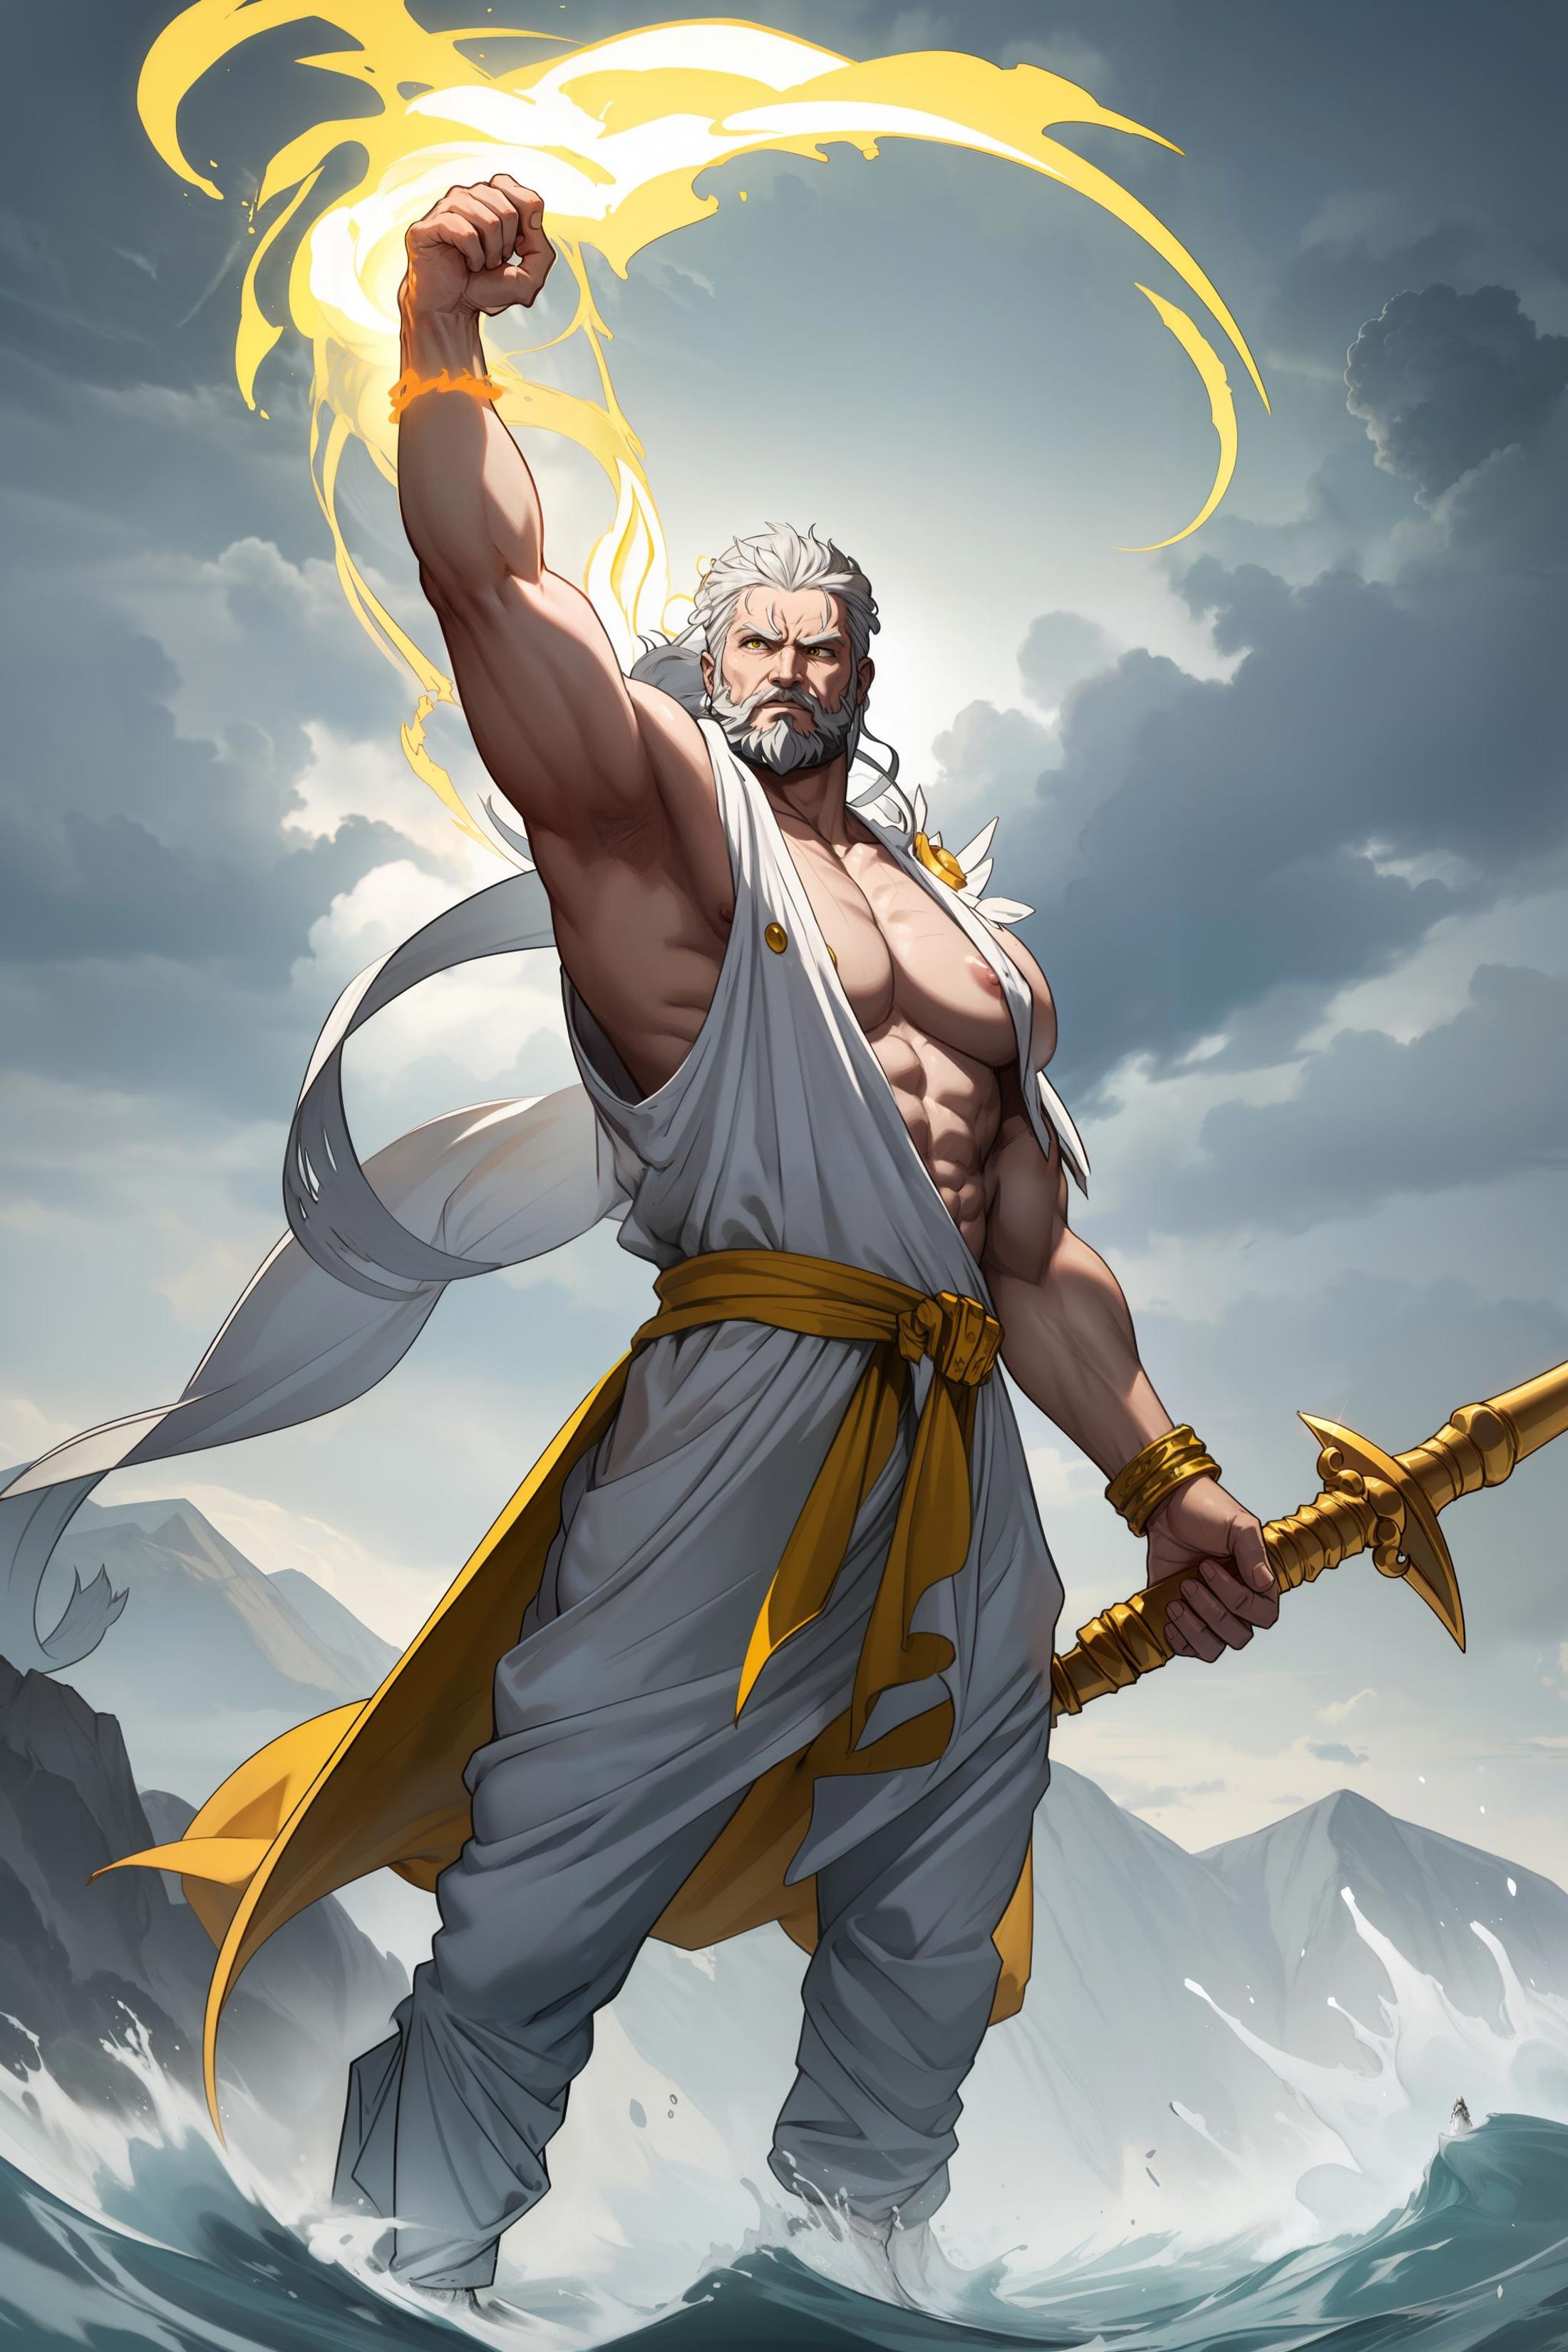 A man in a white robe, holding a sword, with a yellow cloth wrapped around his waist and a yellow cloth on his shoulder, standing in front of mountains.